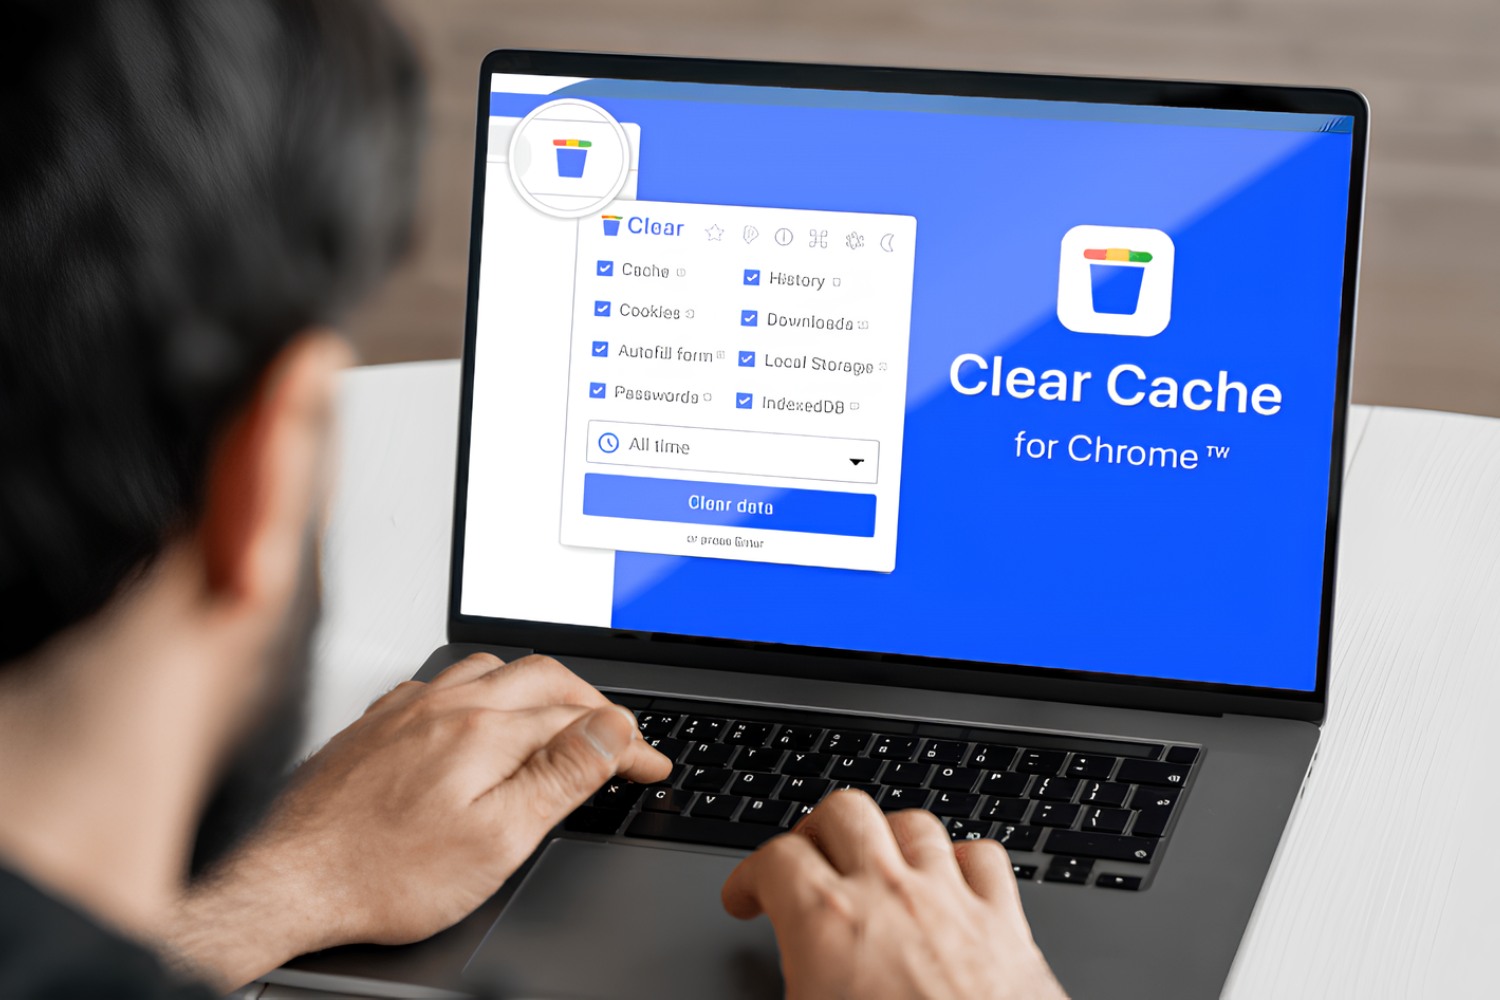 How To Clear The Cache On Google Chrome